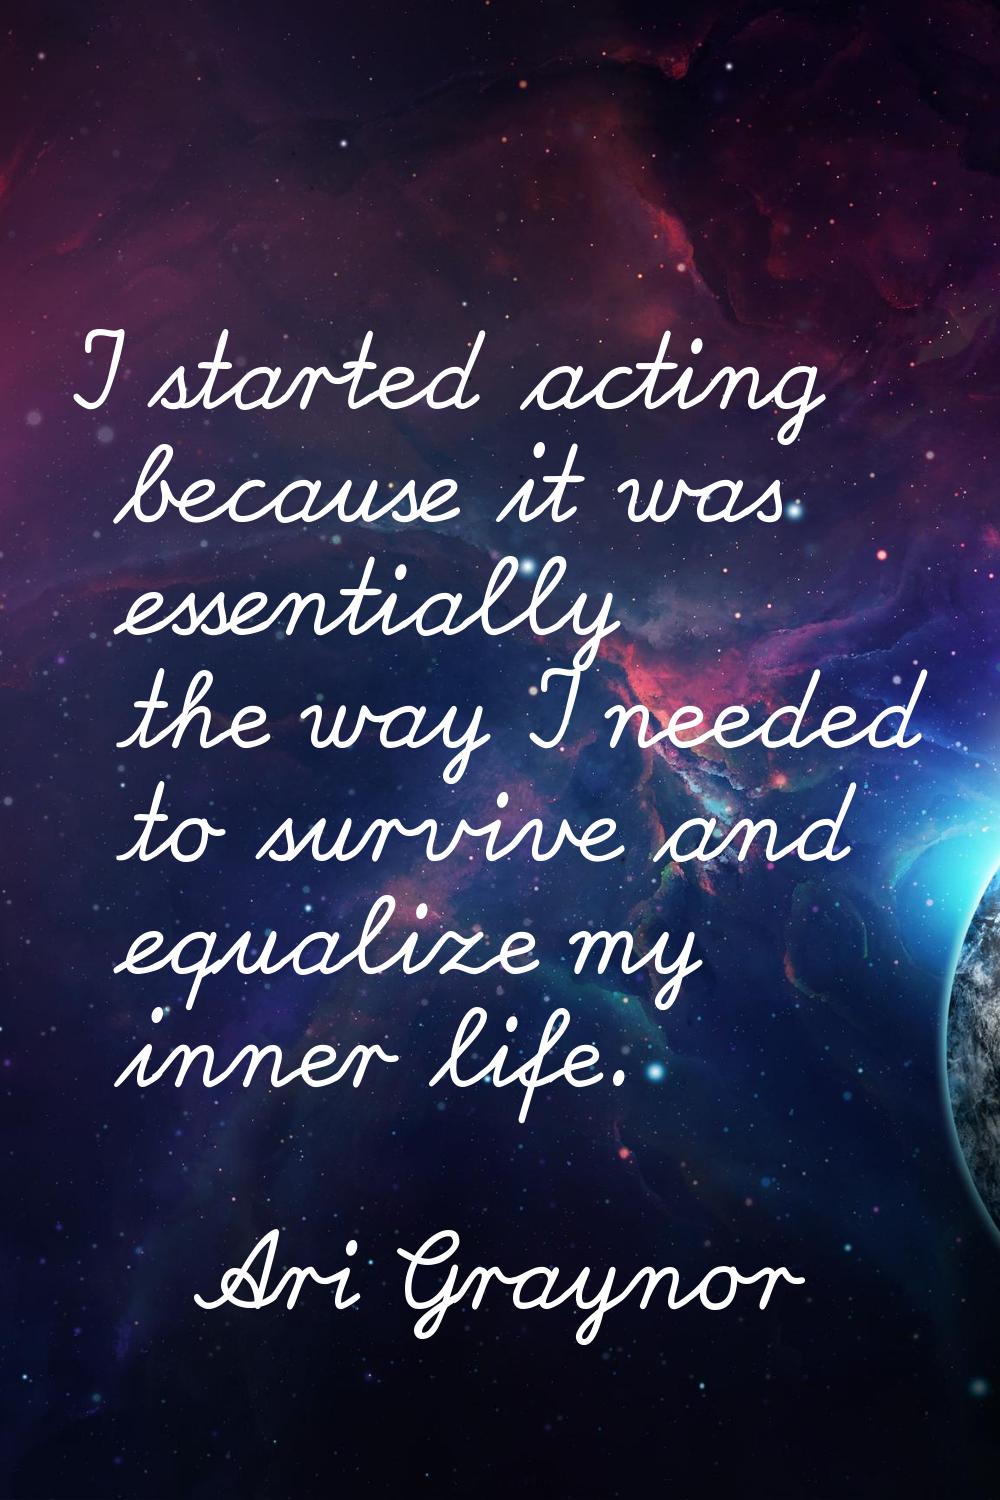 I started acting because it was essentially the way I needed to survive and equalize my inner life.